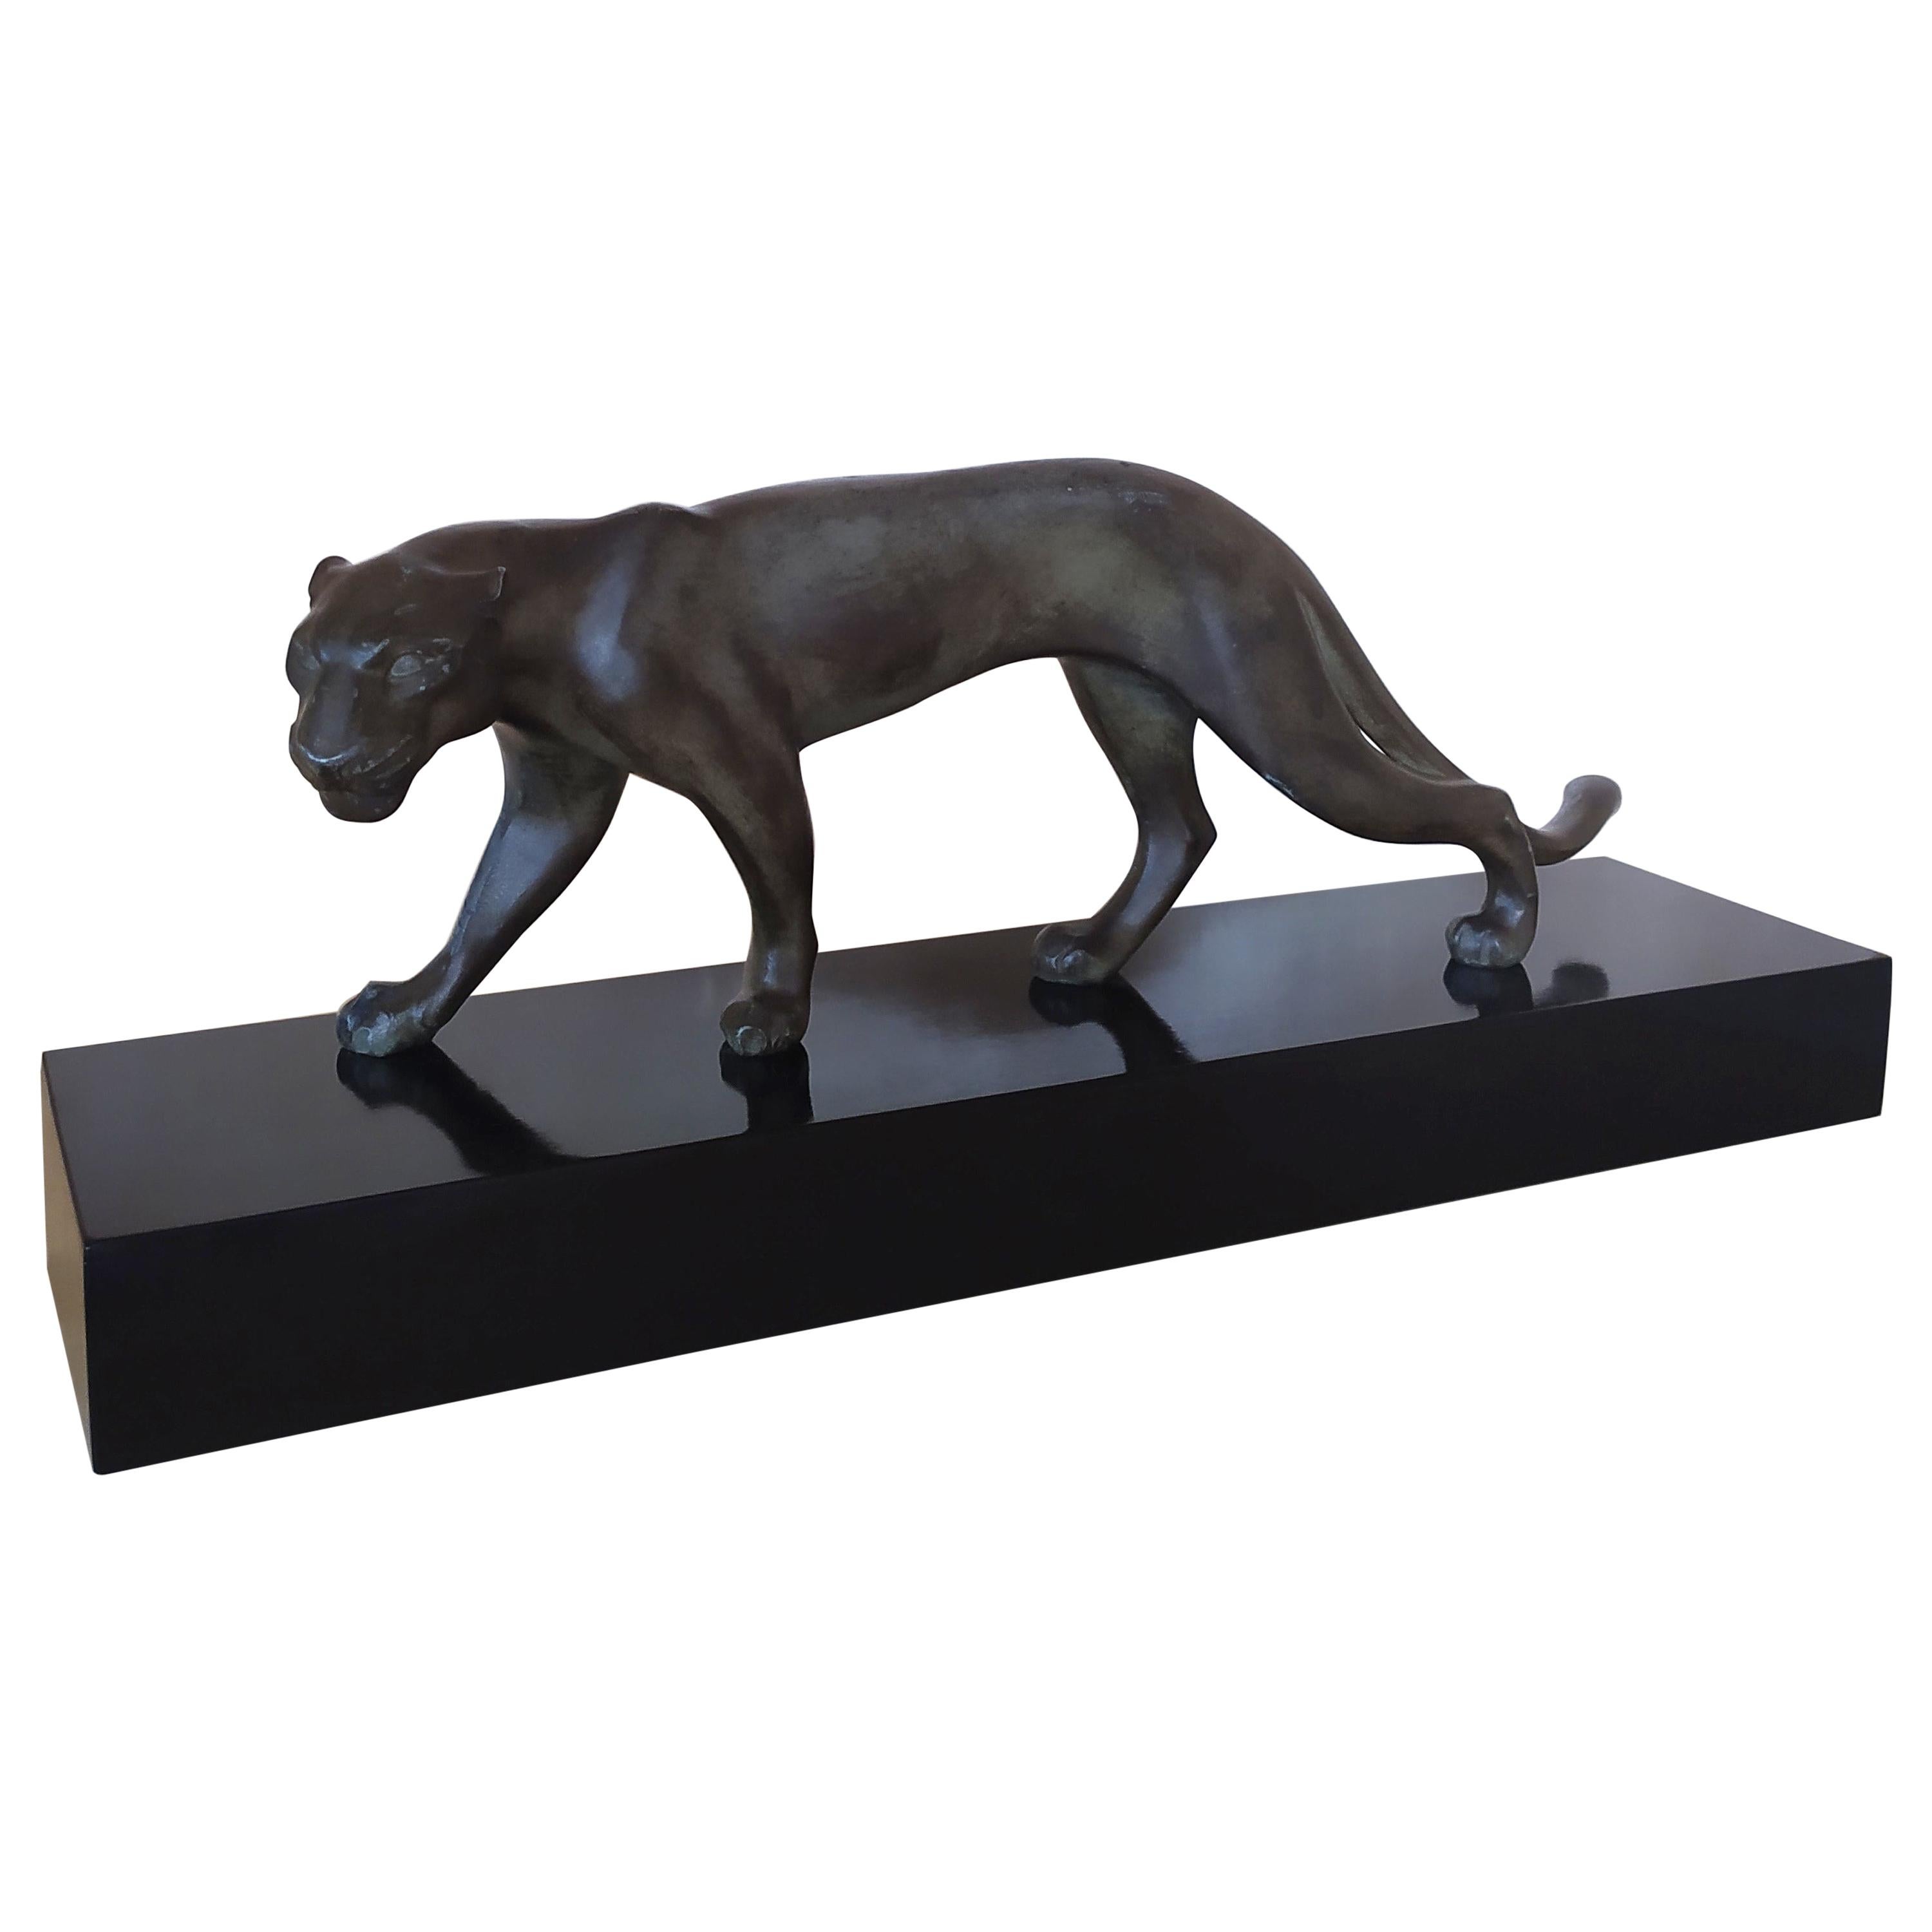 1930s Astonishing Art Deco Panther Sculputure, Made in france